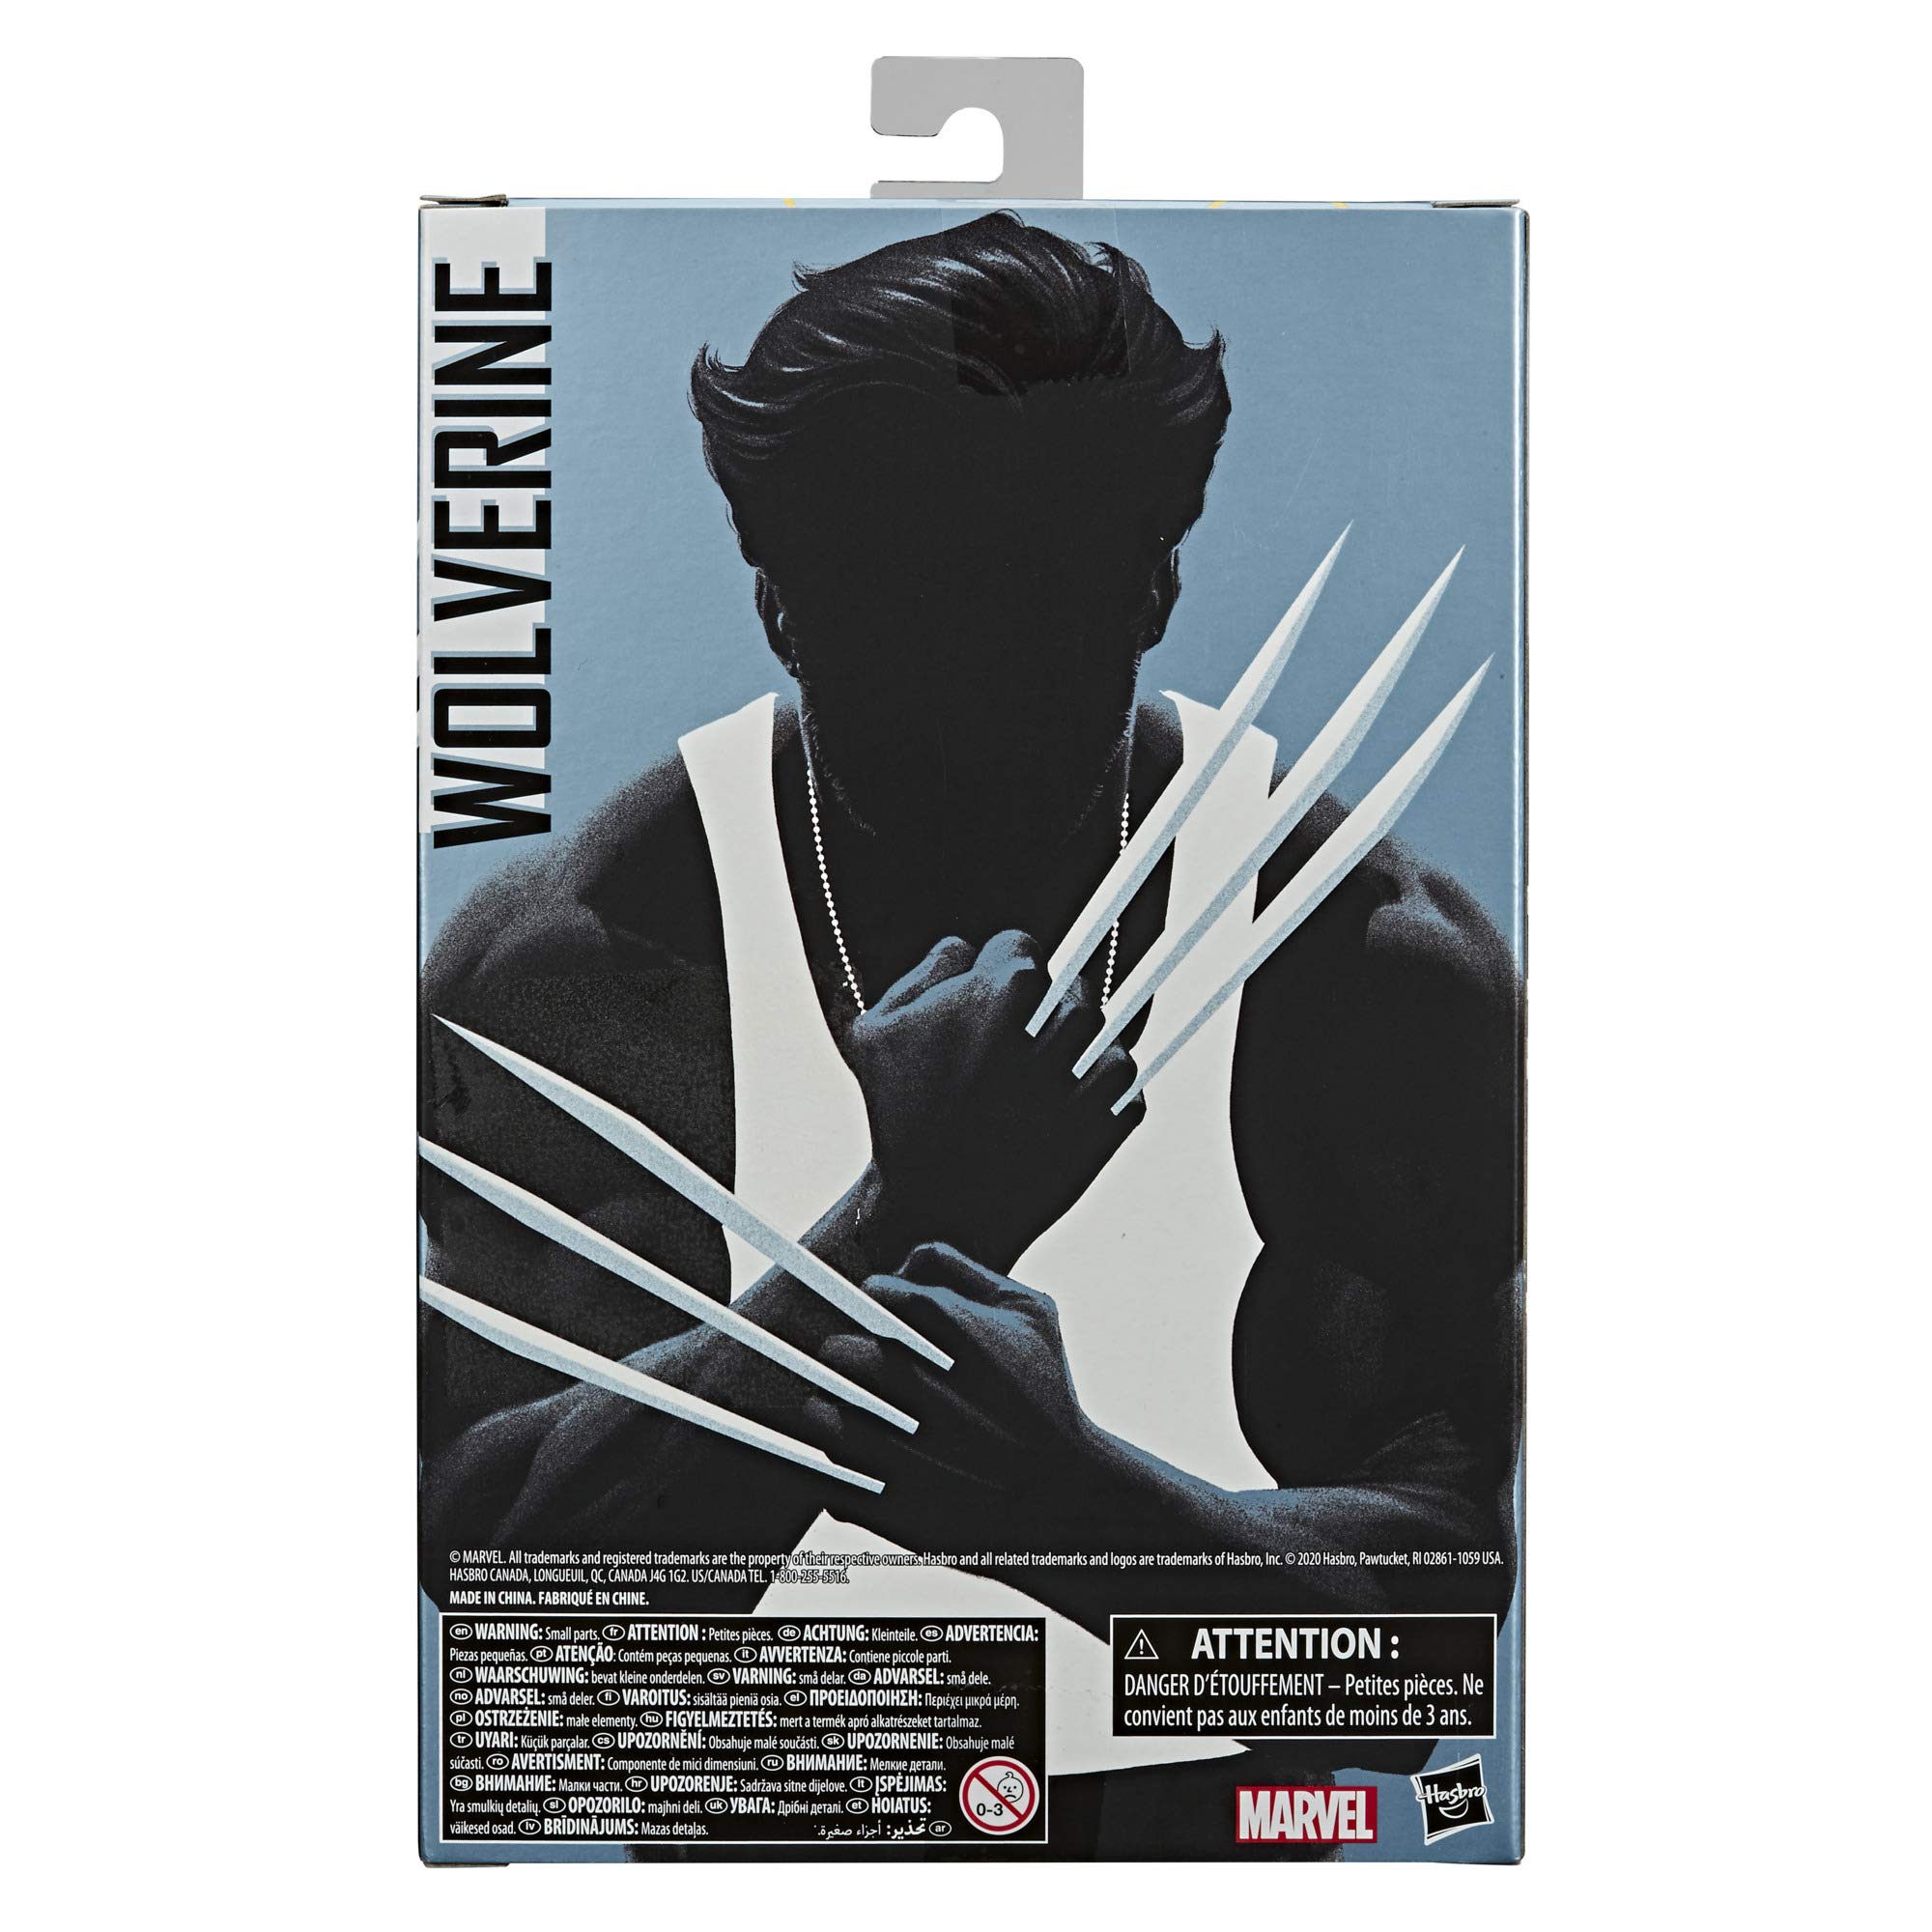 Marvel Hasbro Legends Series Wolverine 6-inch Collectible Action Figure Toy, Ages 14 and Up (Amazon Exclusive)